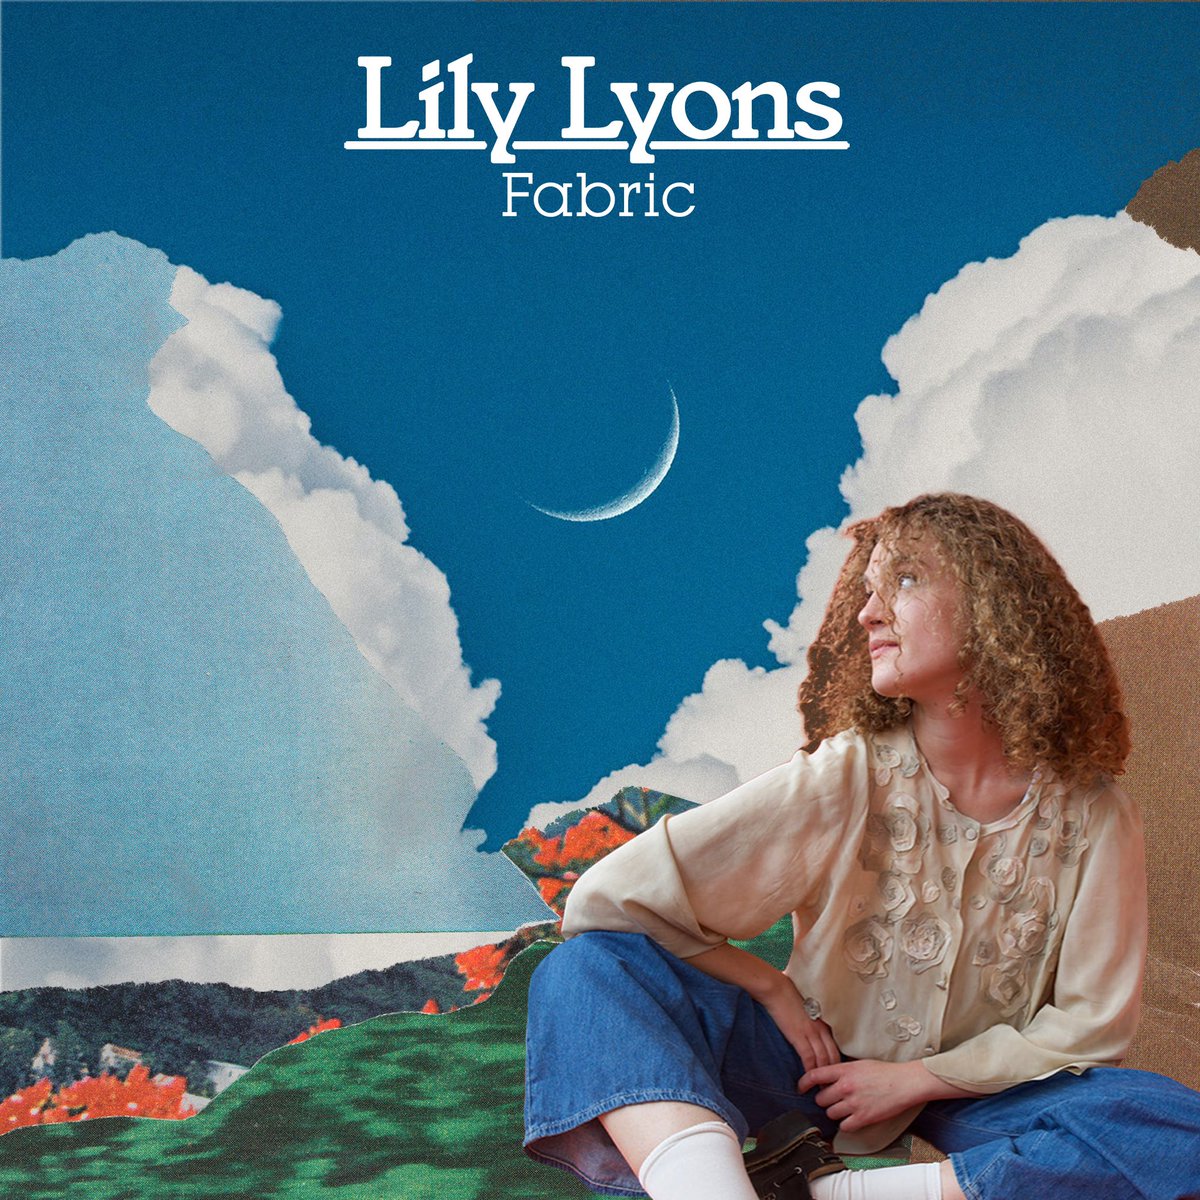 🆕 OUT NOW • The incredible new ‘Fabric’ EP from @lilylyonsmusic is out now ✨ It includes the singles ‘Spectre’ and ‘Spinning Sides’. Listen here > LilyLyons.lnk.to/Fabric_EPTW